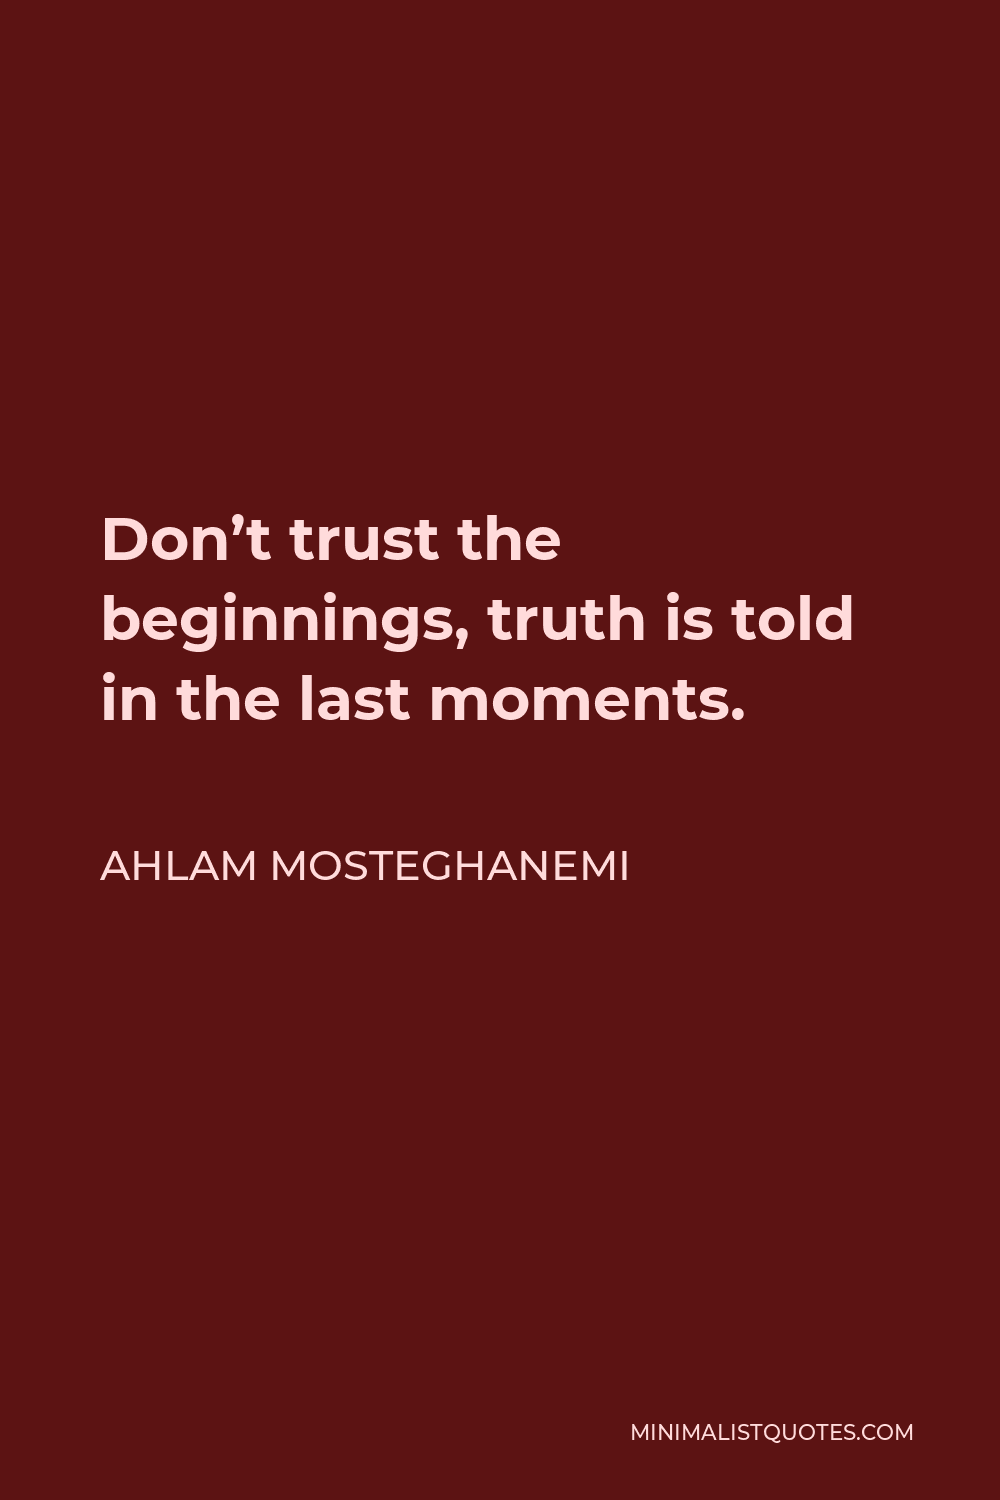 Ahlam Mosteghanemi Quote - Don’t trust the beginnings, truth is told in the last moments.